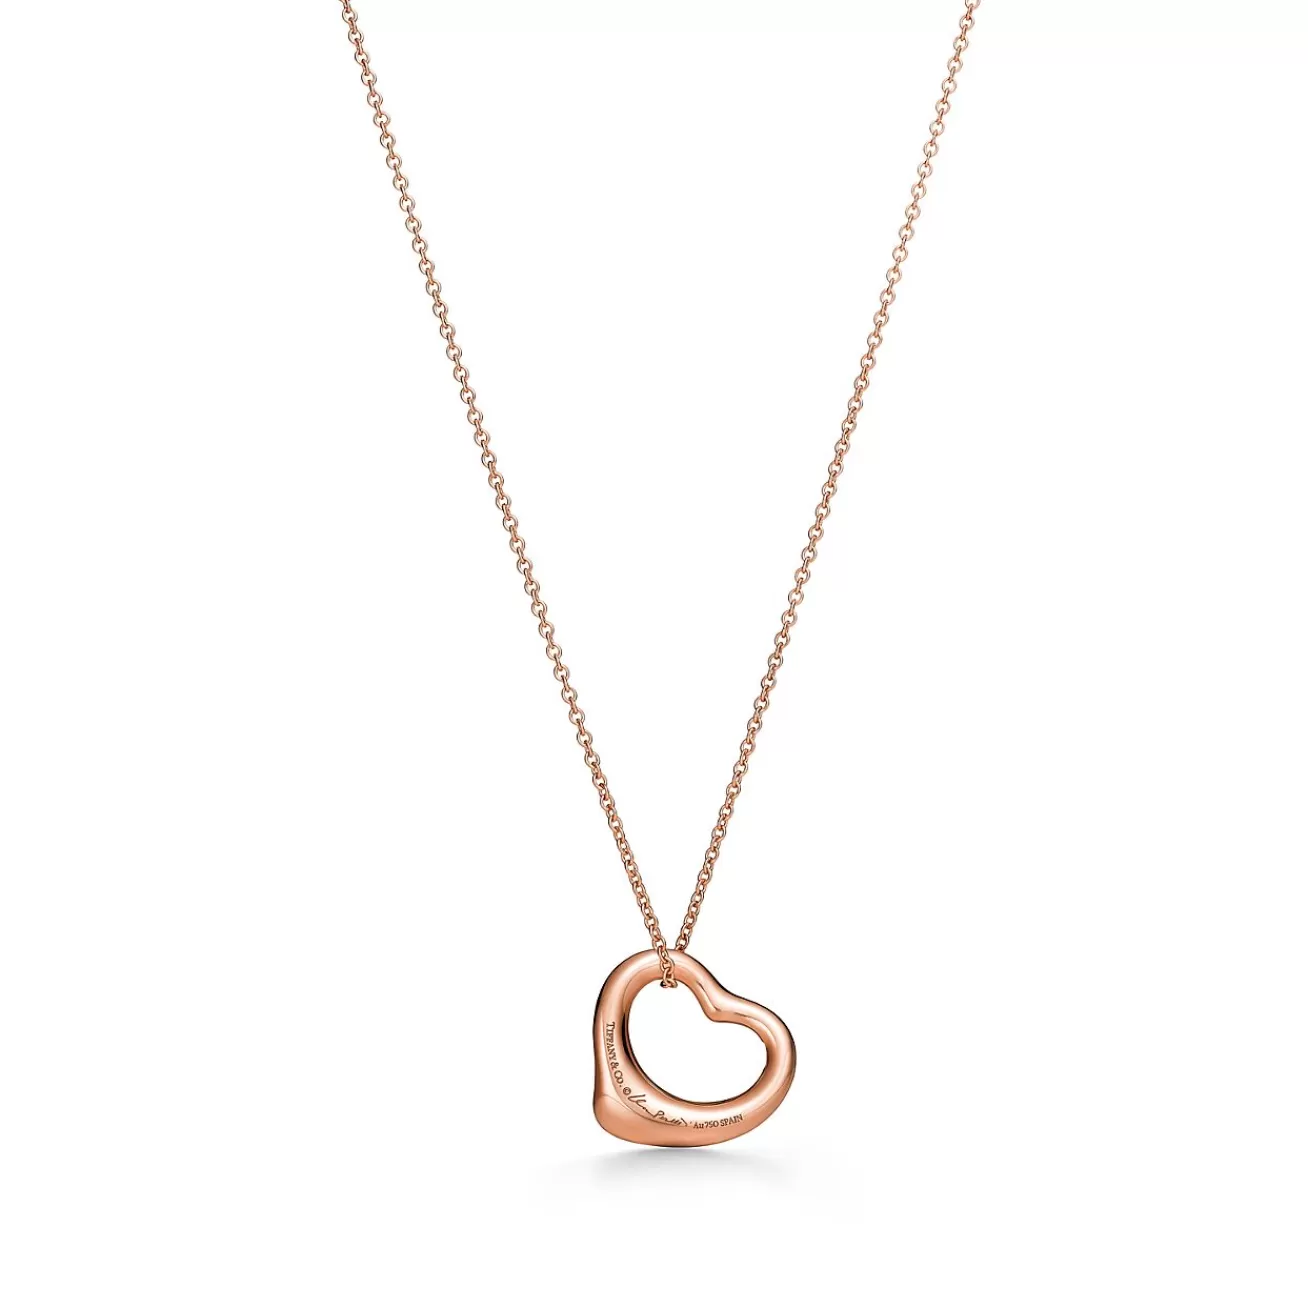 Tiffany & Co. Elsa Peretti® Open Heart pendant in 18k rose gold with diamonds. | ^ Necklaces & Pendants | Rose Gold Jewelry